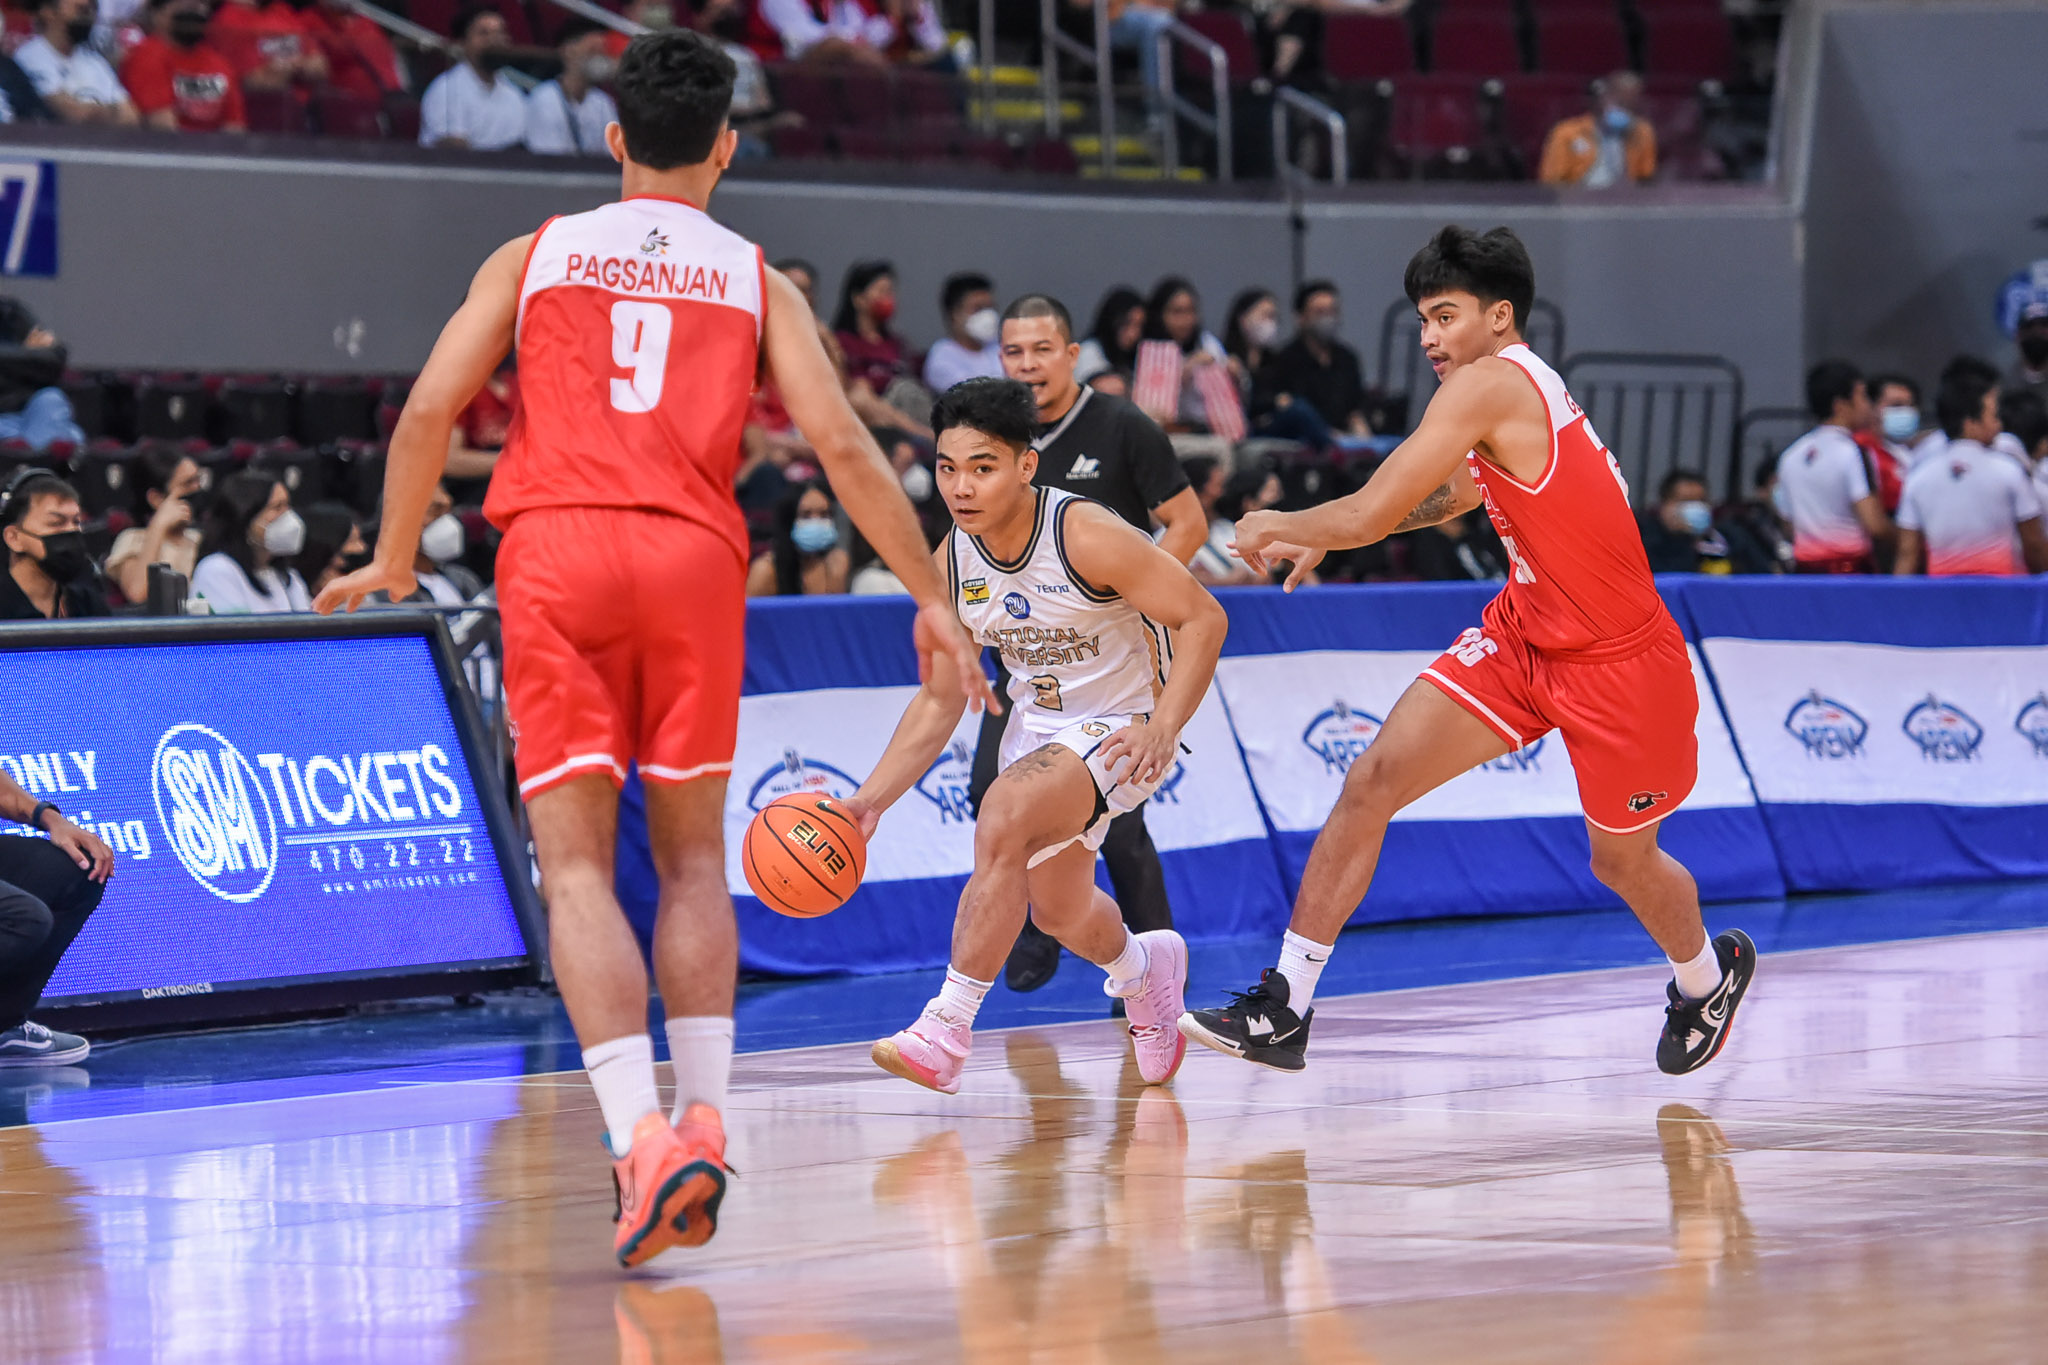 UAAP-85-MBB-NU-vs.-UE-Kean-Baclaan-8046 Baclaan admits he is still adjusting to NU a month after shock transfer Basketball News NU UAAP  - philippine sports news